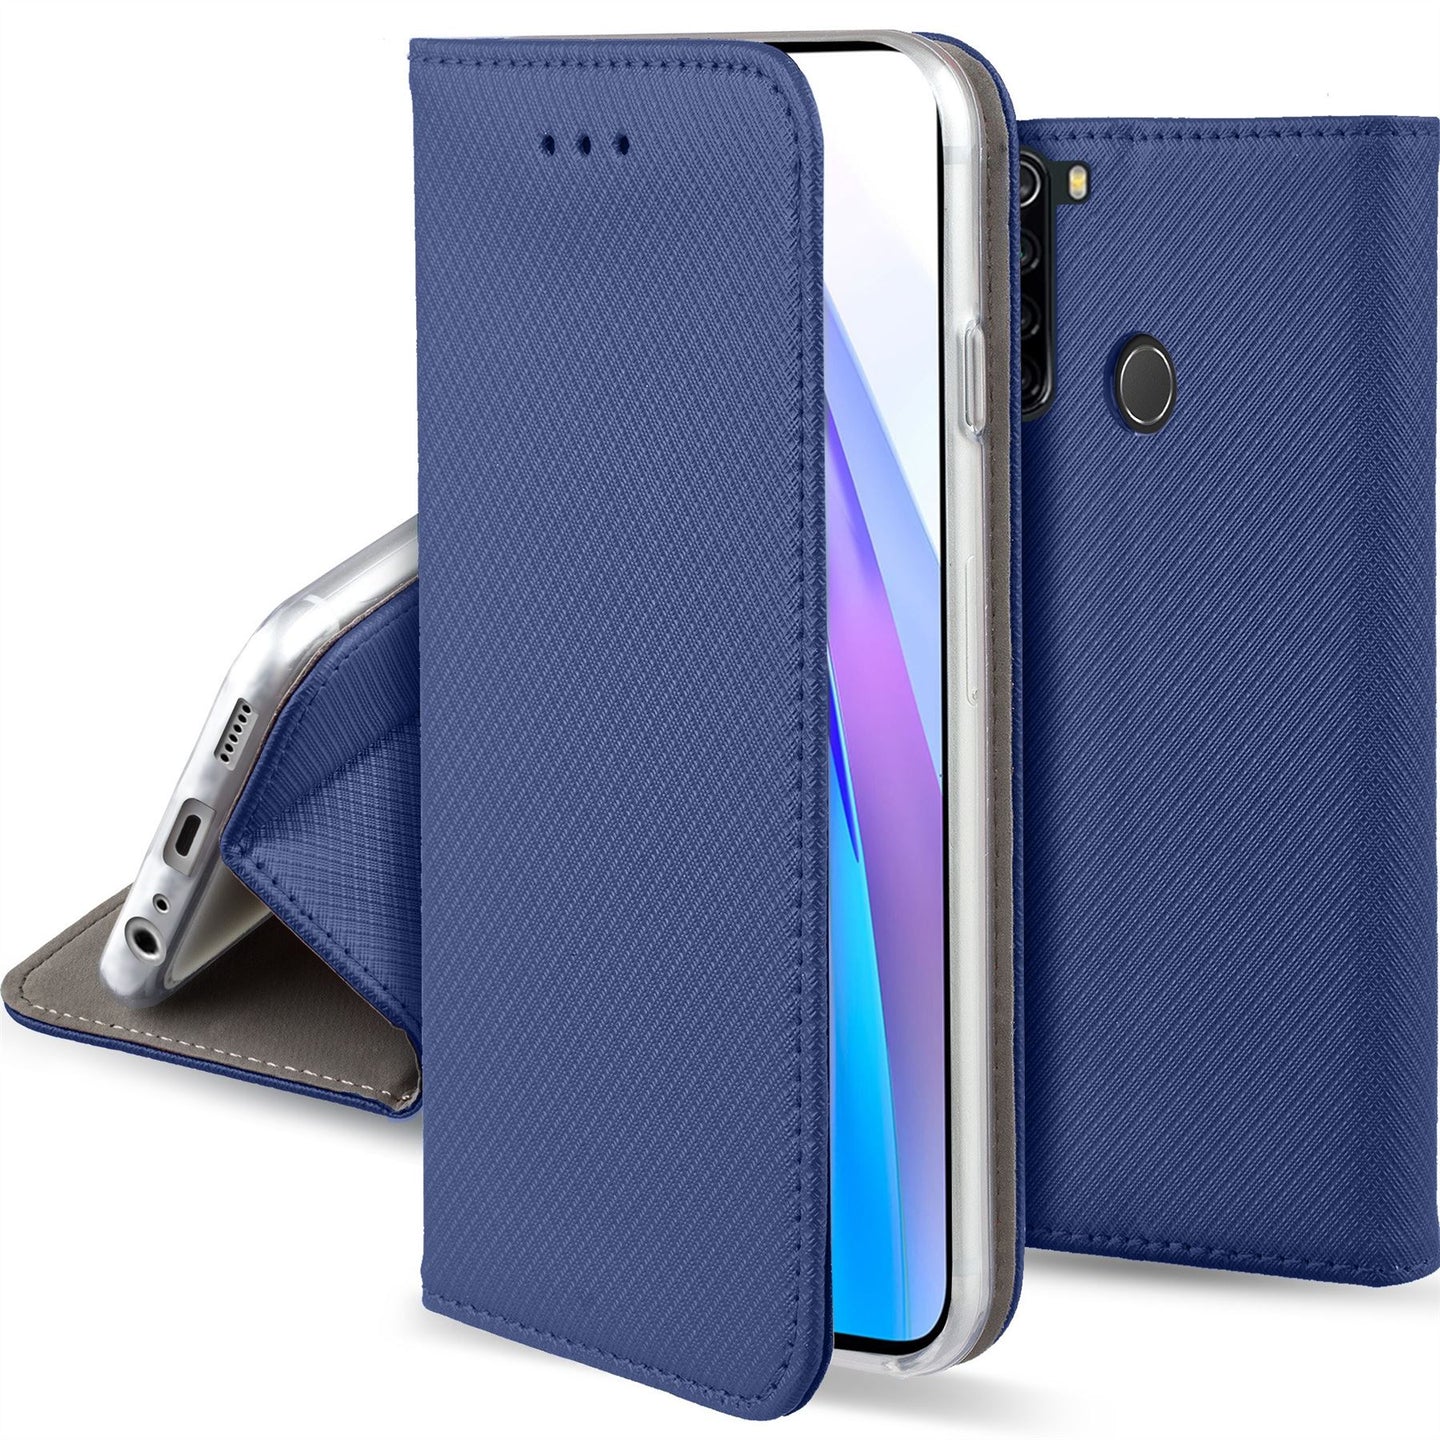 Moozy Case Flip Cover for Xiaomi Redmi Note 8T, Dark Blue - Smart Magnetic Flip Case with Card Holder and Stand